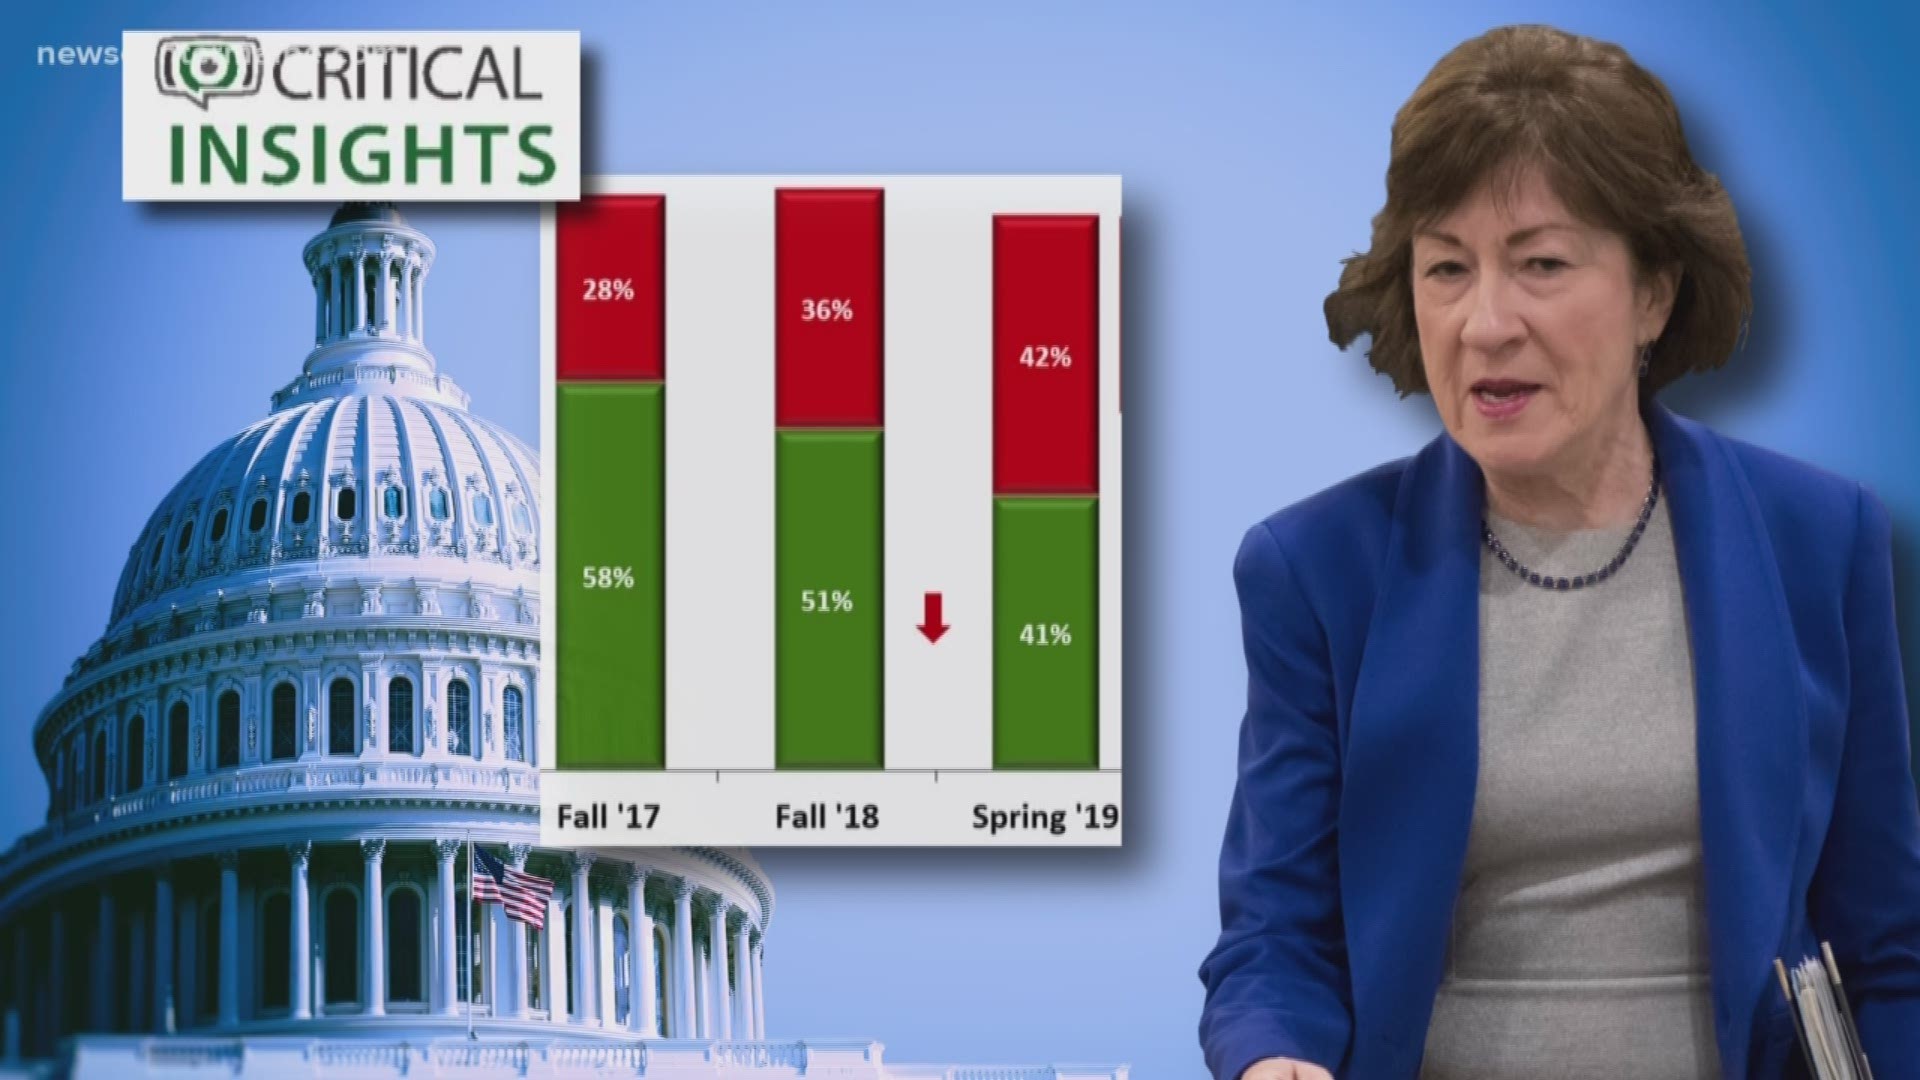 A nonpartisan poll found that the approval rating for Sen. Susan Collins among Maine voters may have gone down 17 points in a year.